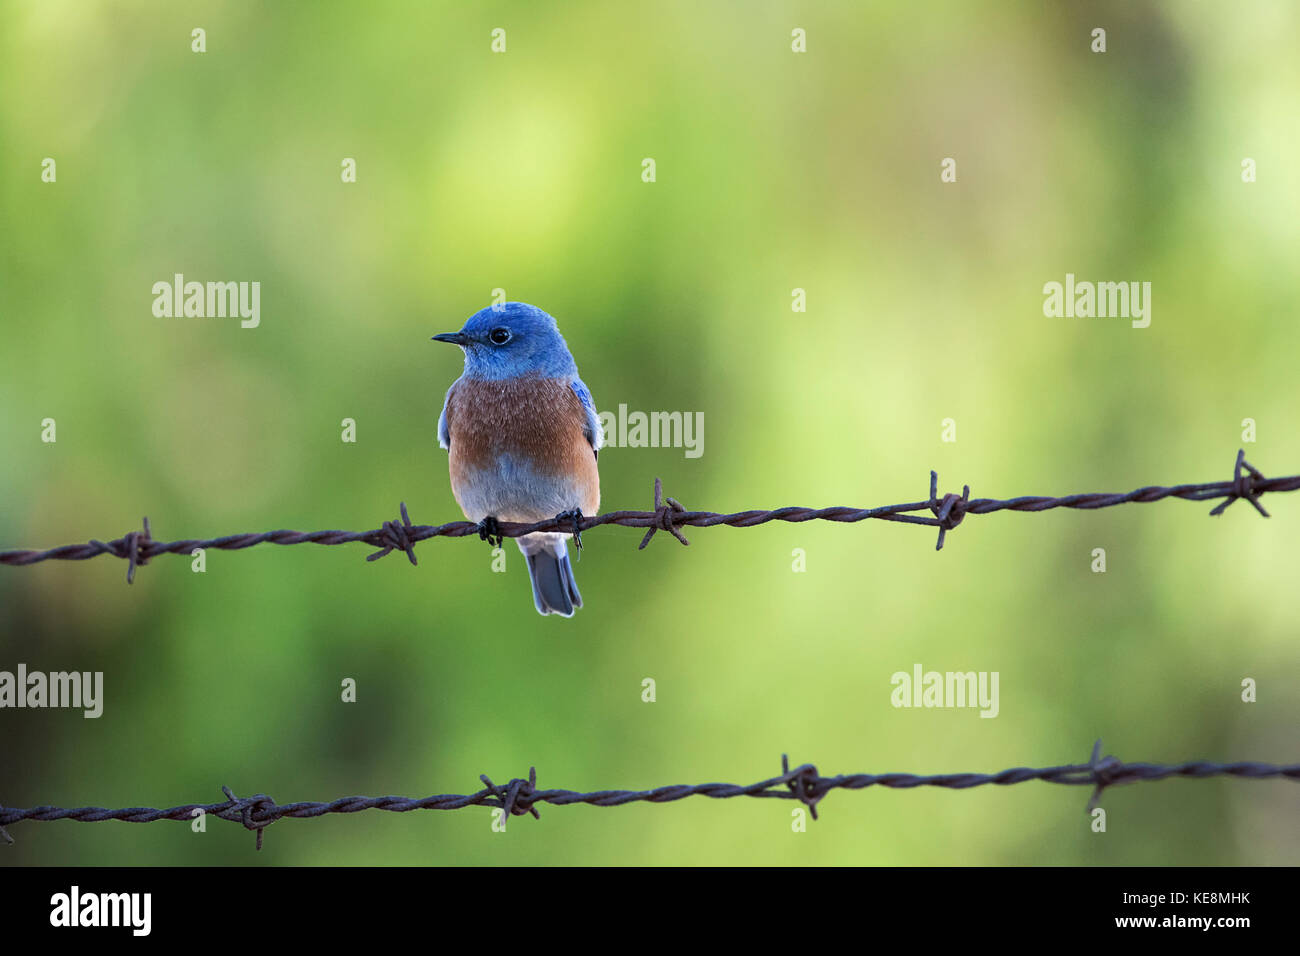 Small Blue Bird against green blur background Stock Photo